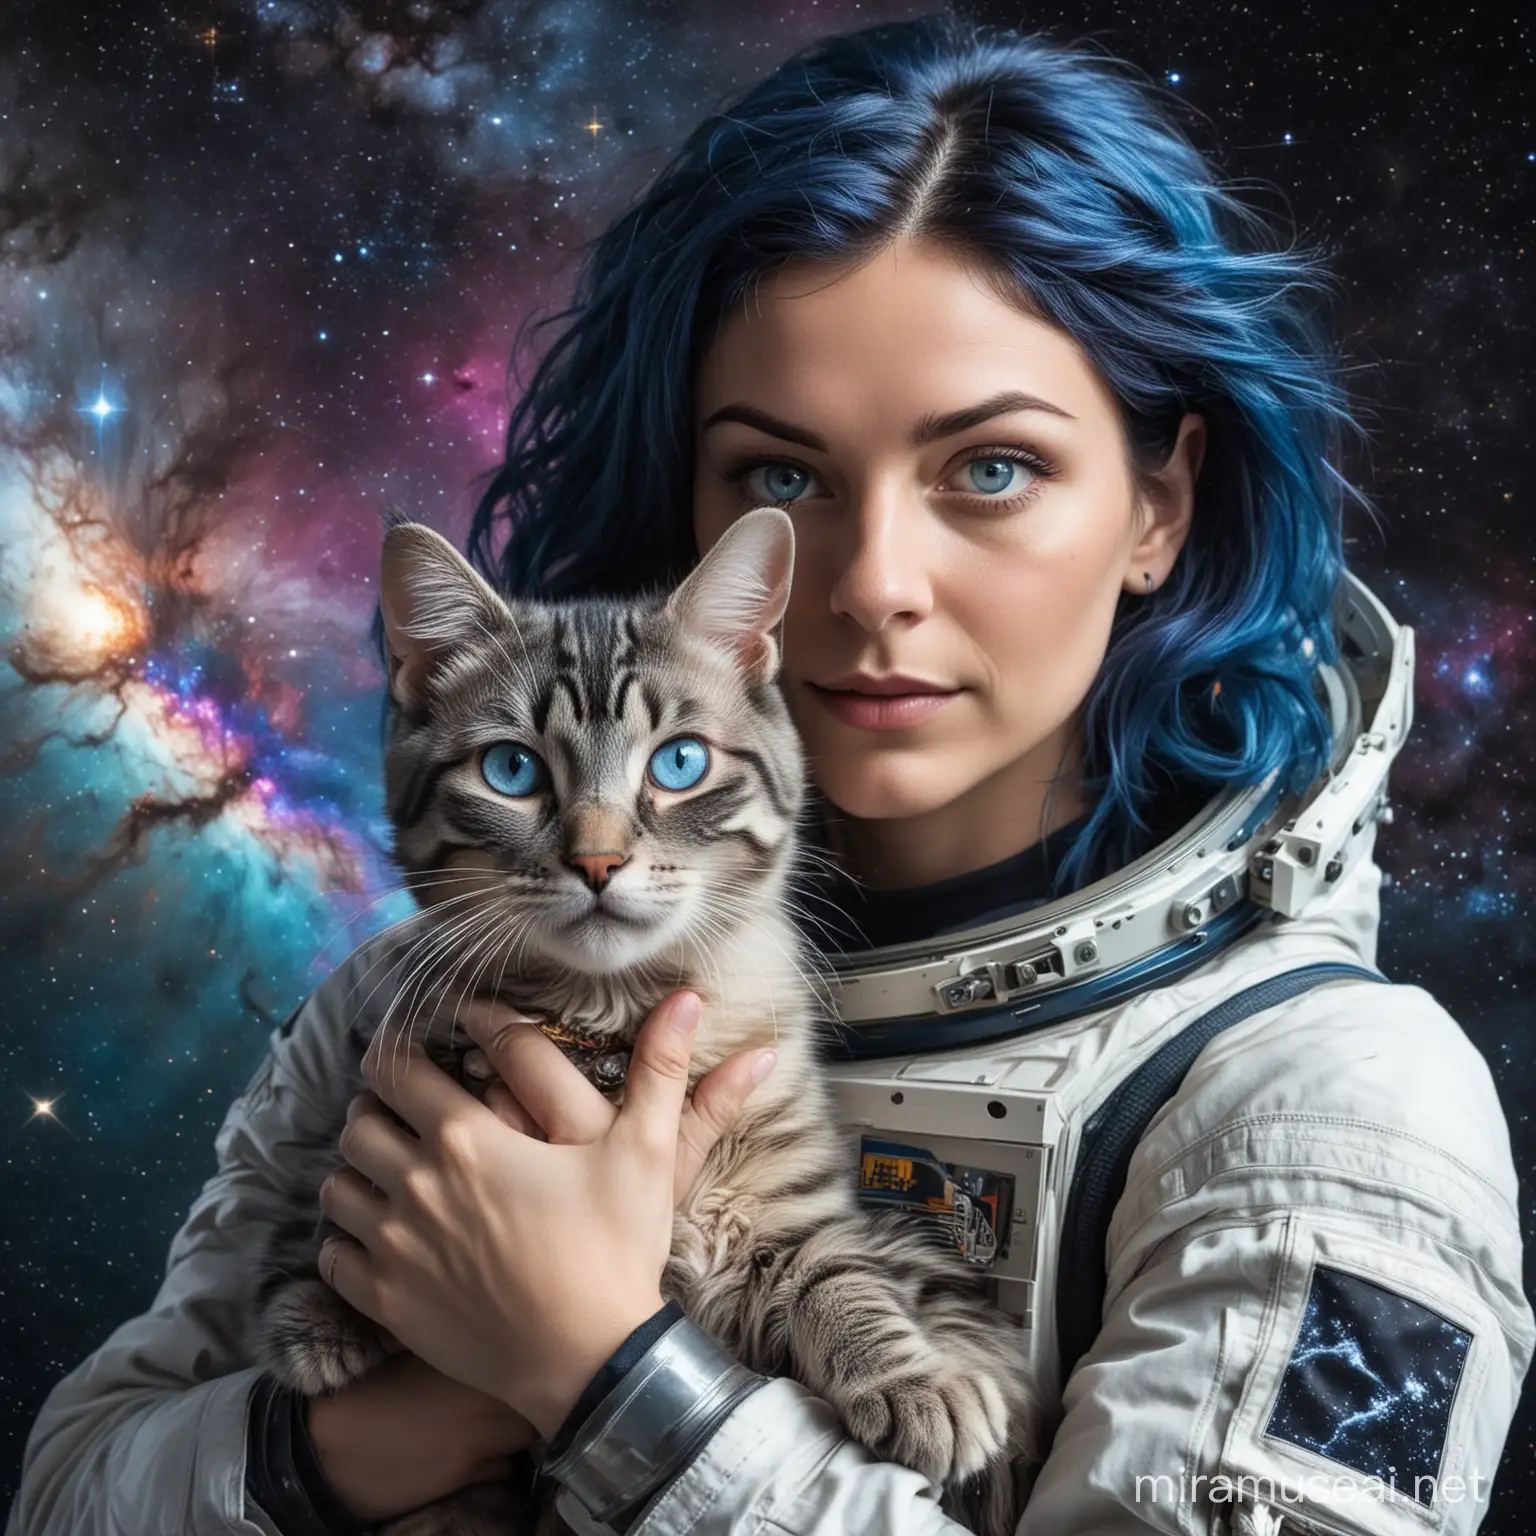 Caucasian Woman with Dark Blue Hair Holding Tabby Cat in Space